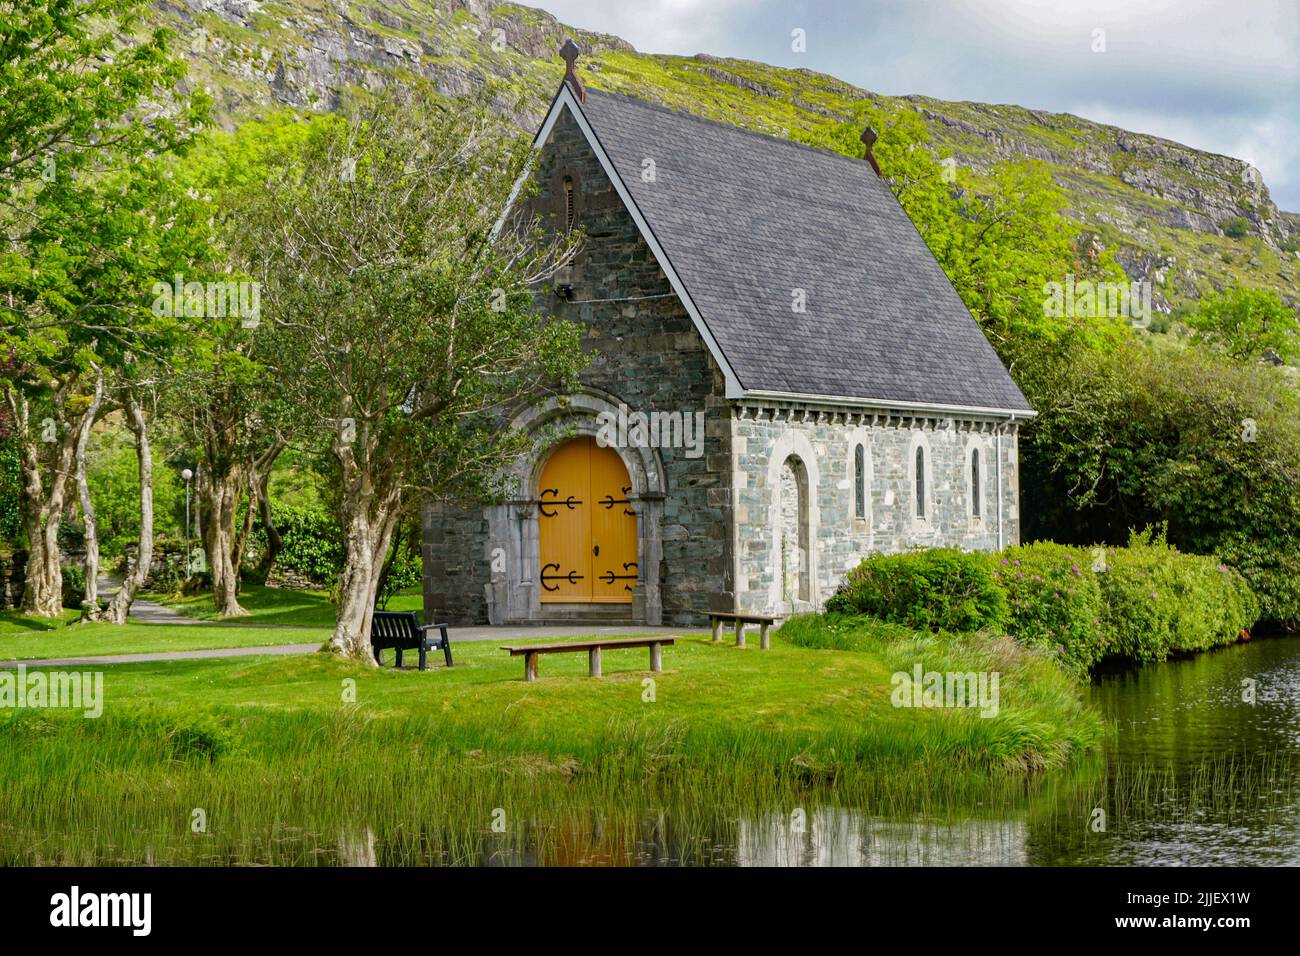 Gougane Barra, Co. Cork, Ireland: 19th-century oratory built on a small island in Gougane Lake, a scenic valley in the Shehy Mountains. Stock Photo